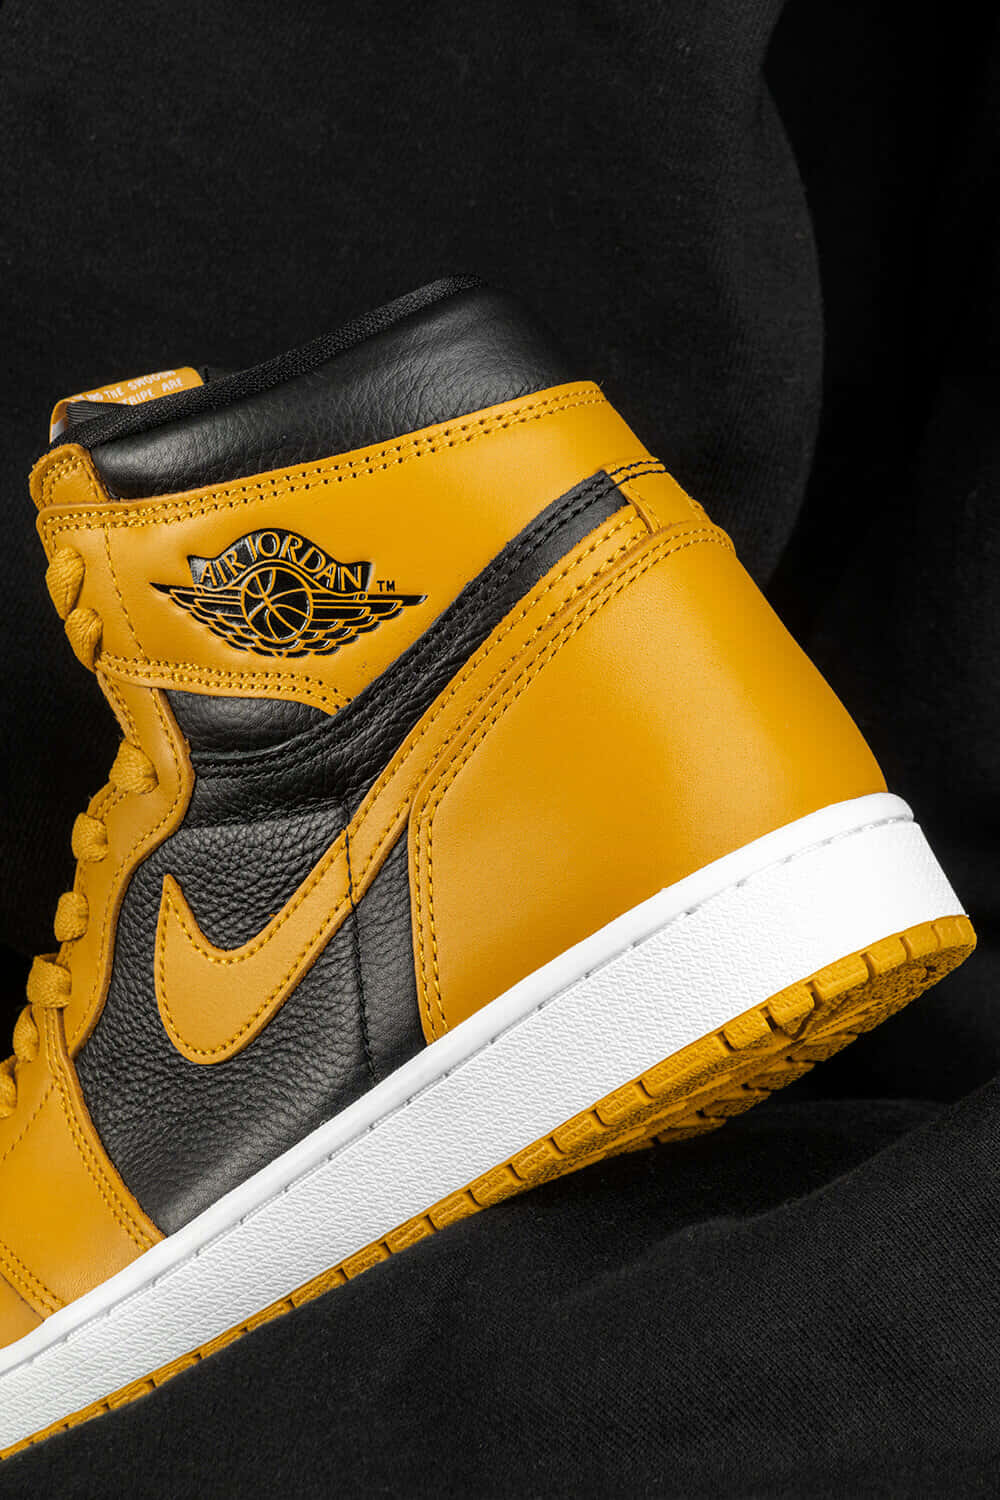 "Walk into the game with style and confidence with a pair of yellow Jordan sneakers." Wallpaper